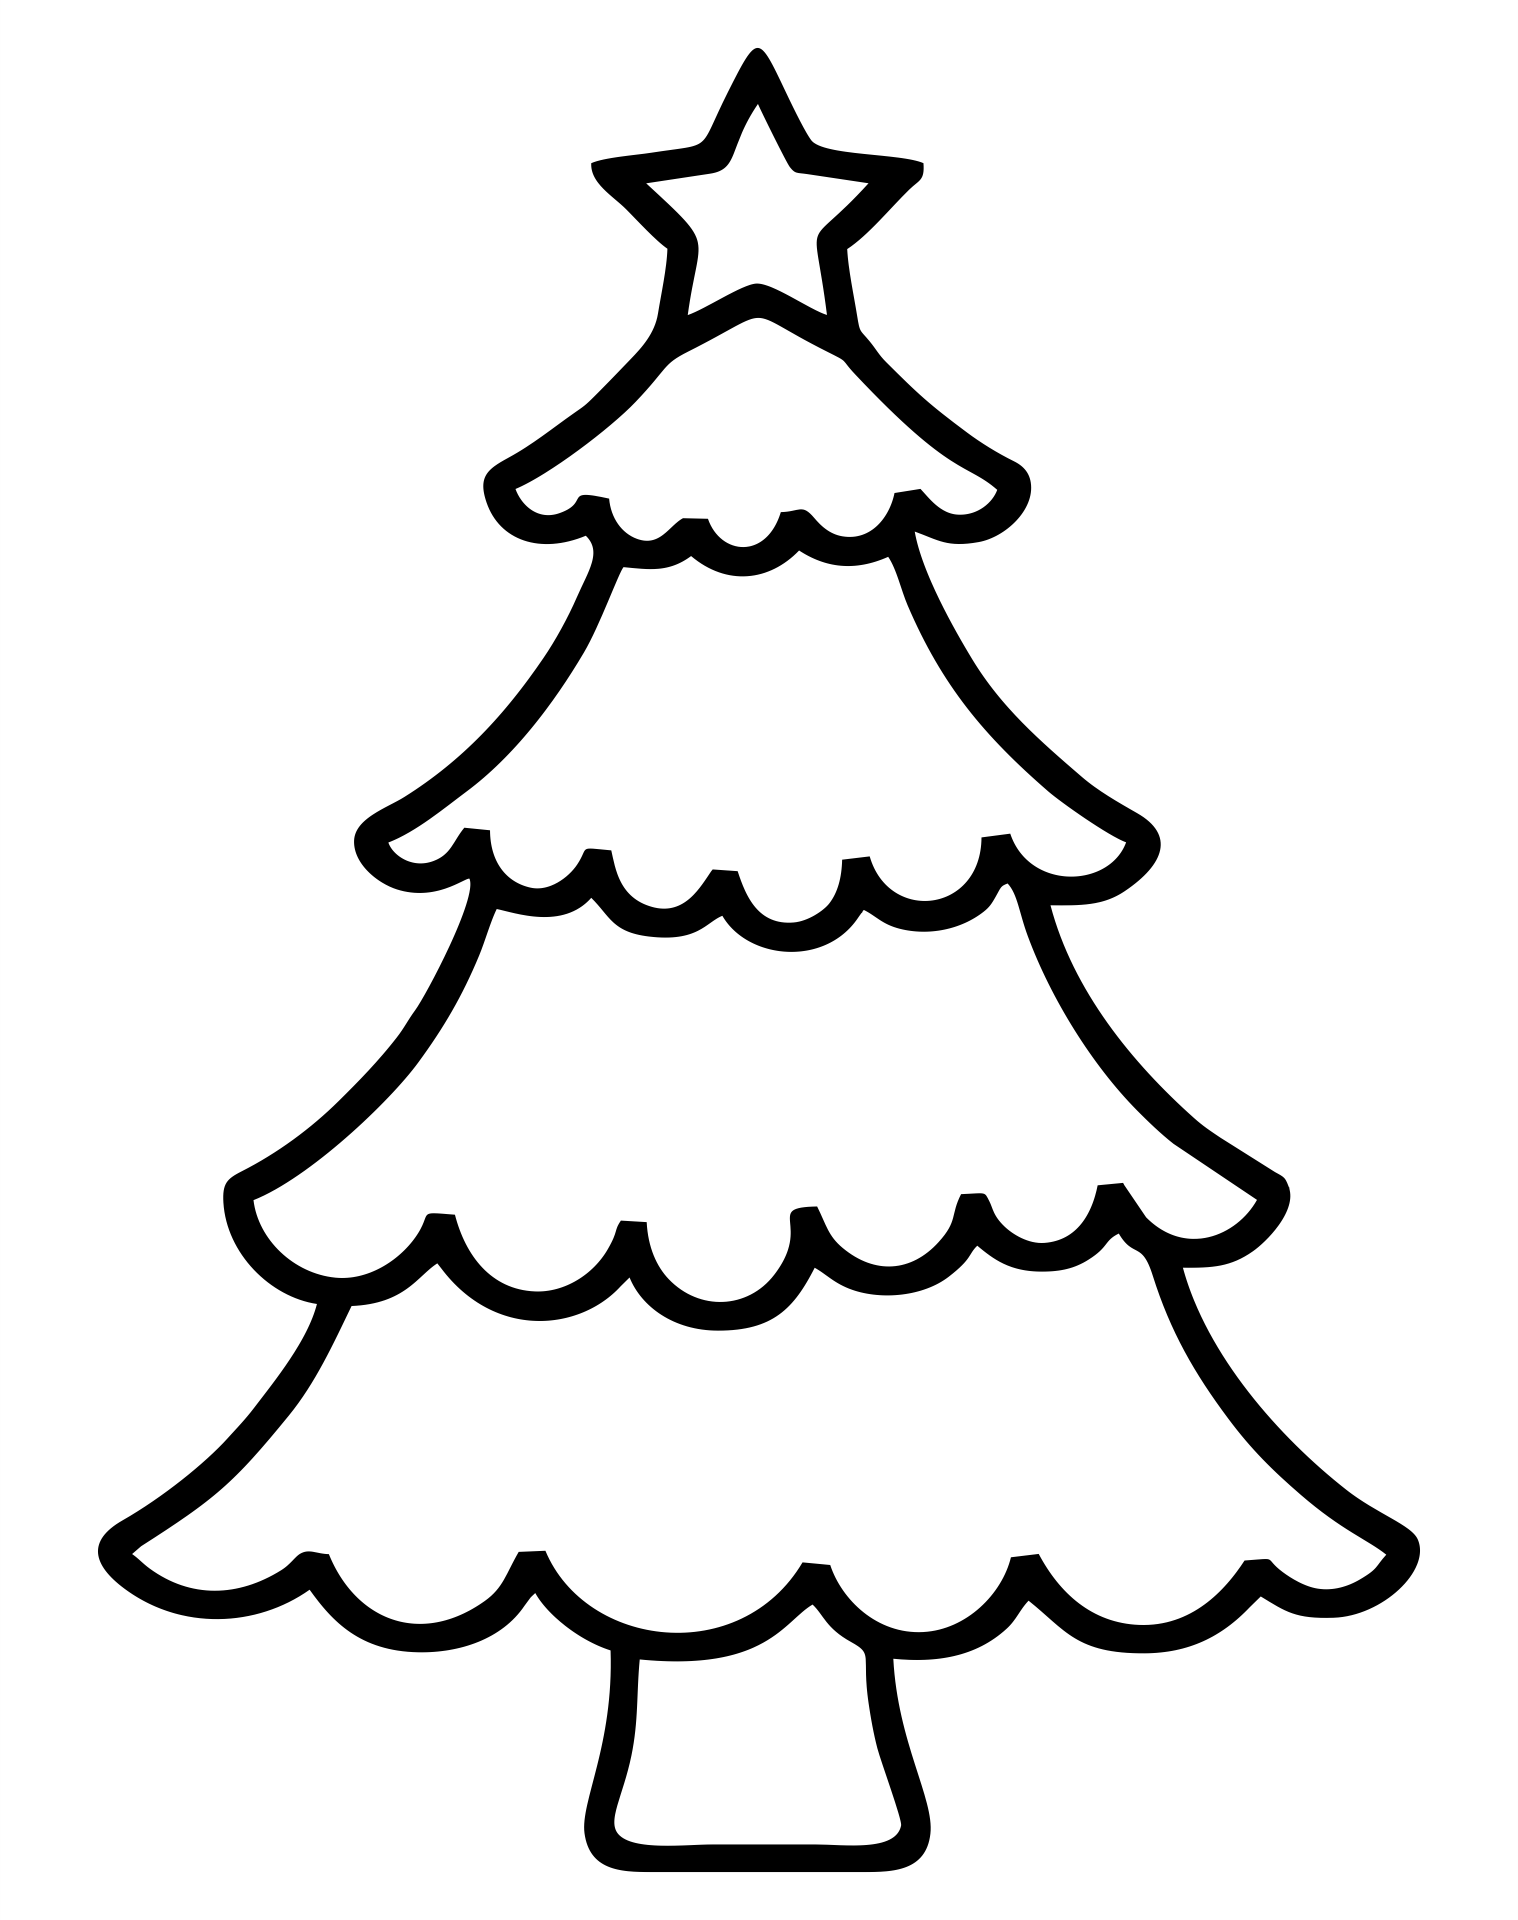 colour-and-design-your-own-christmas-tree-printables-in-the-playroom